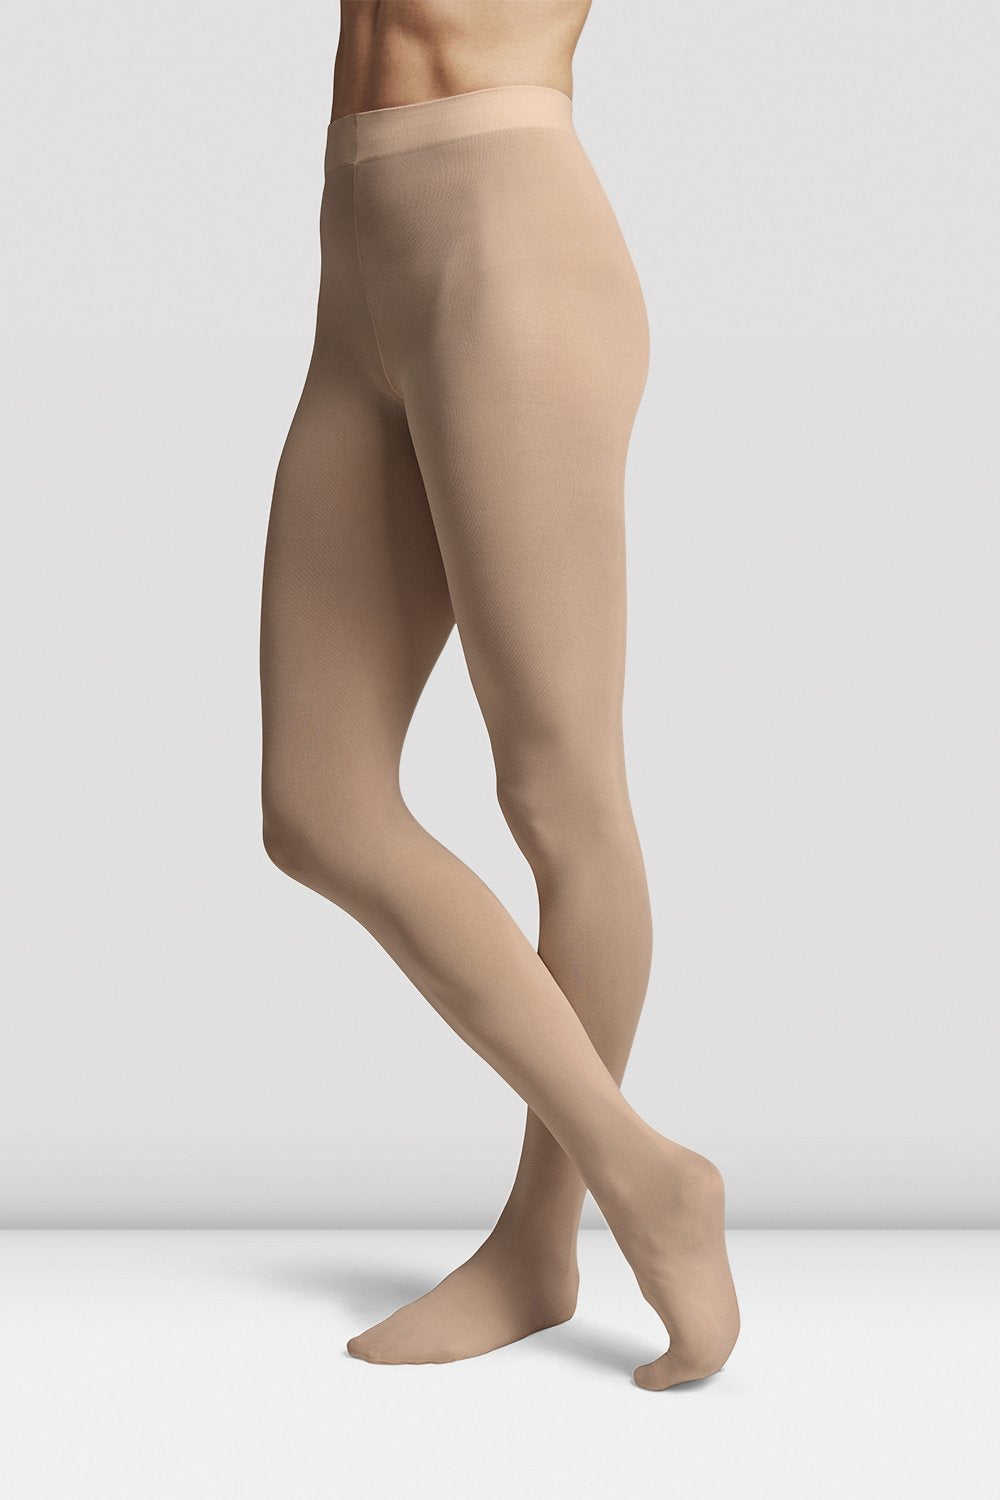 CHILD TAN FOOTED TIGHTS